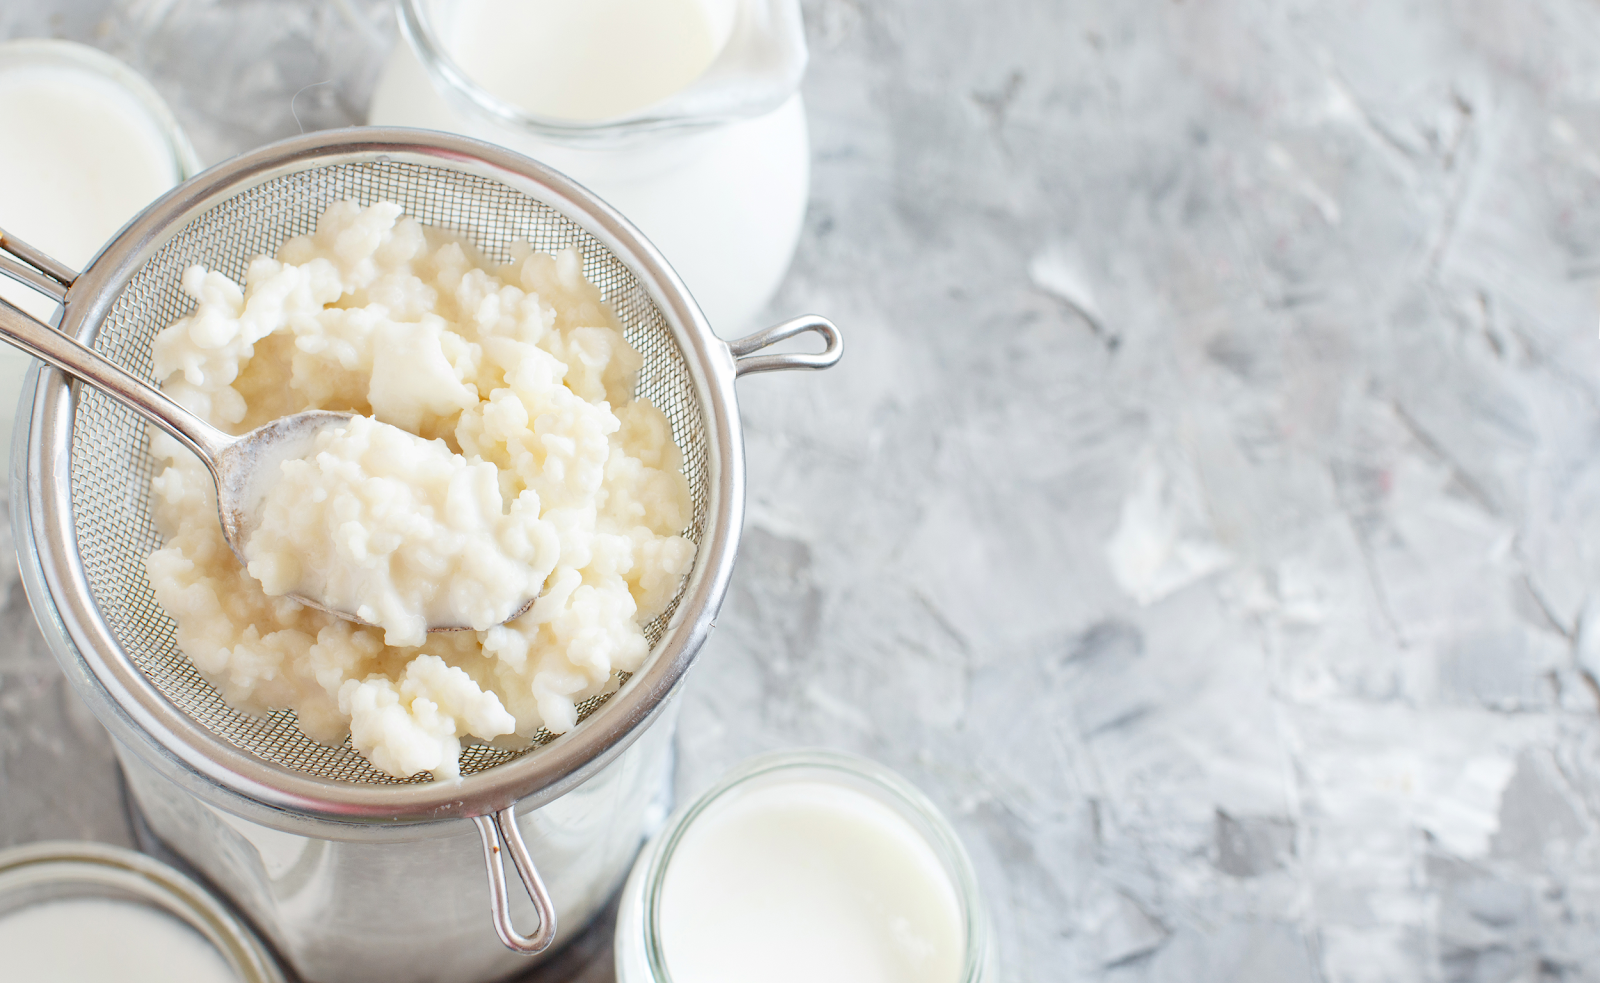  how to make your own kefir at home